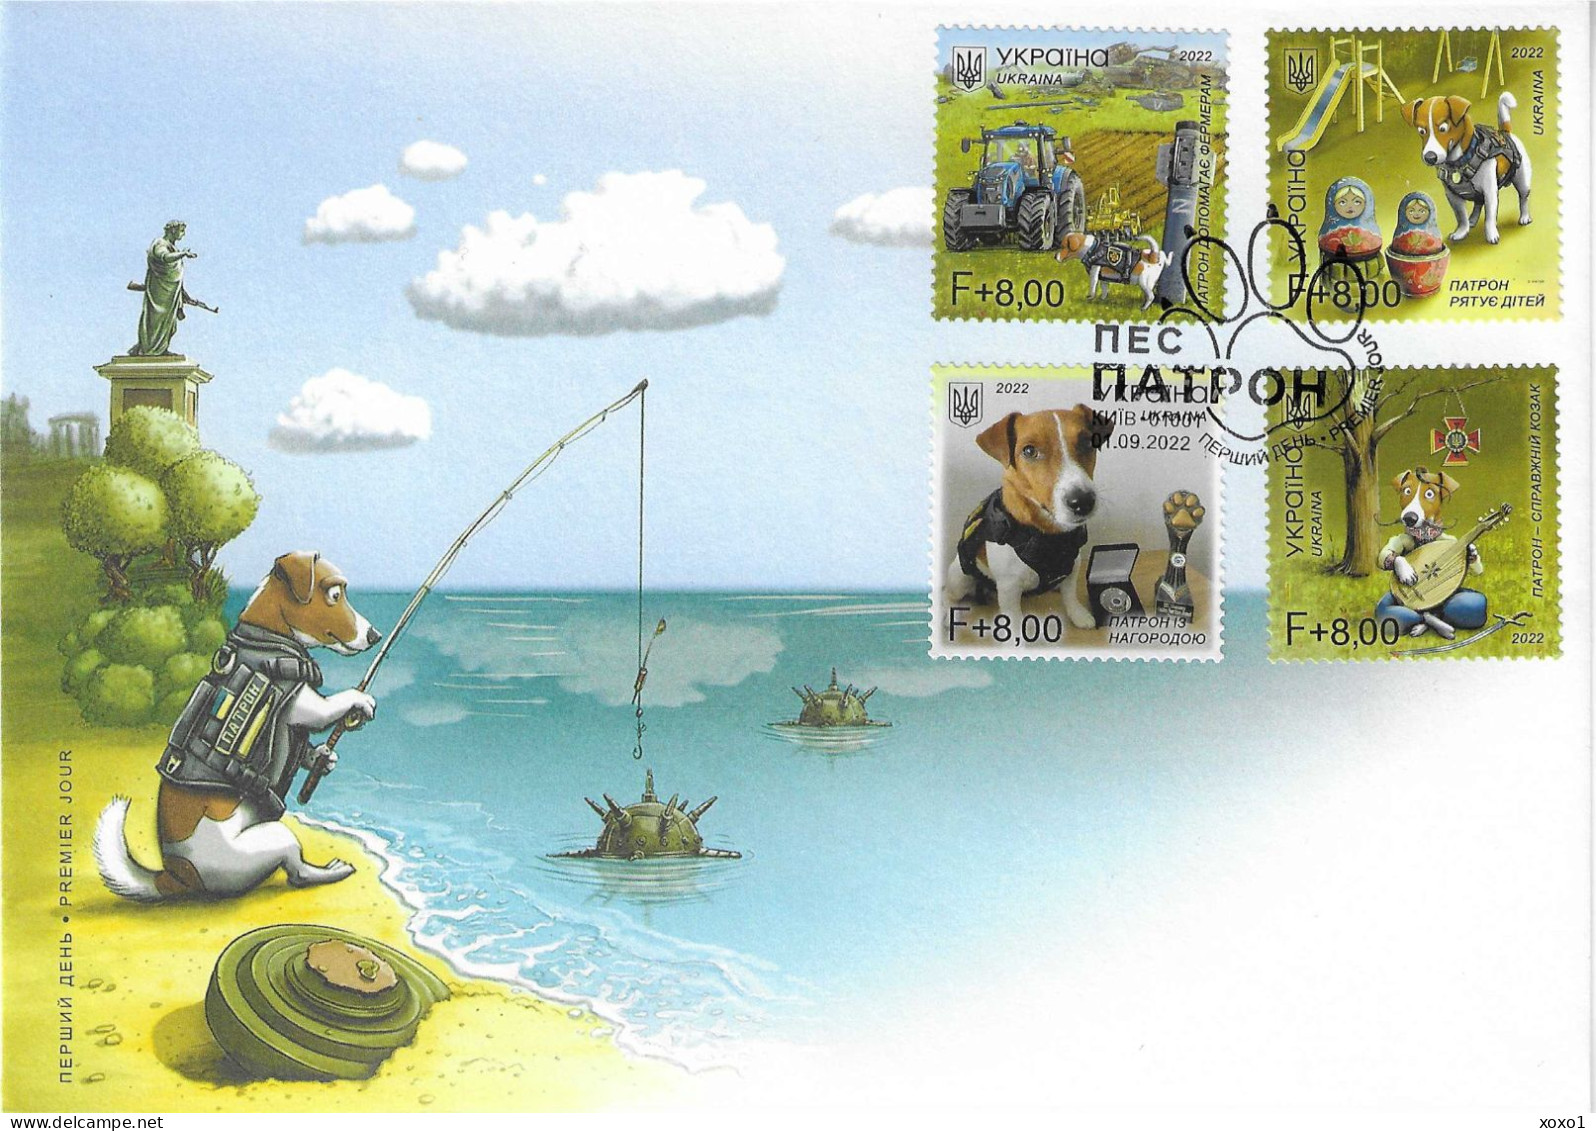 Ukraine 2022 MiNr. 2047 - 2050 WW3, Detection Dog “Patron”, Jack Russell Terrier, Militaria  FDC  MNH ** 9.25 € - Dogs